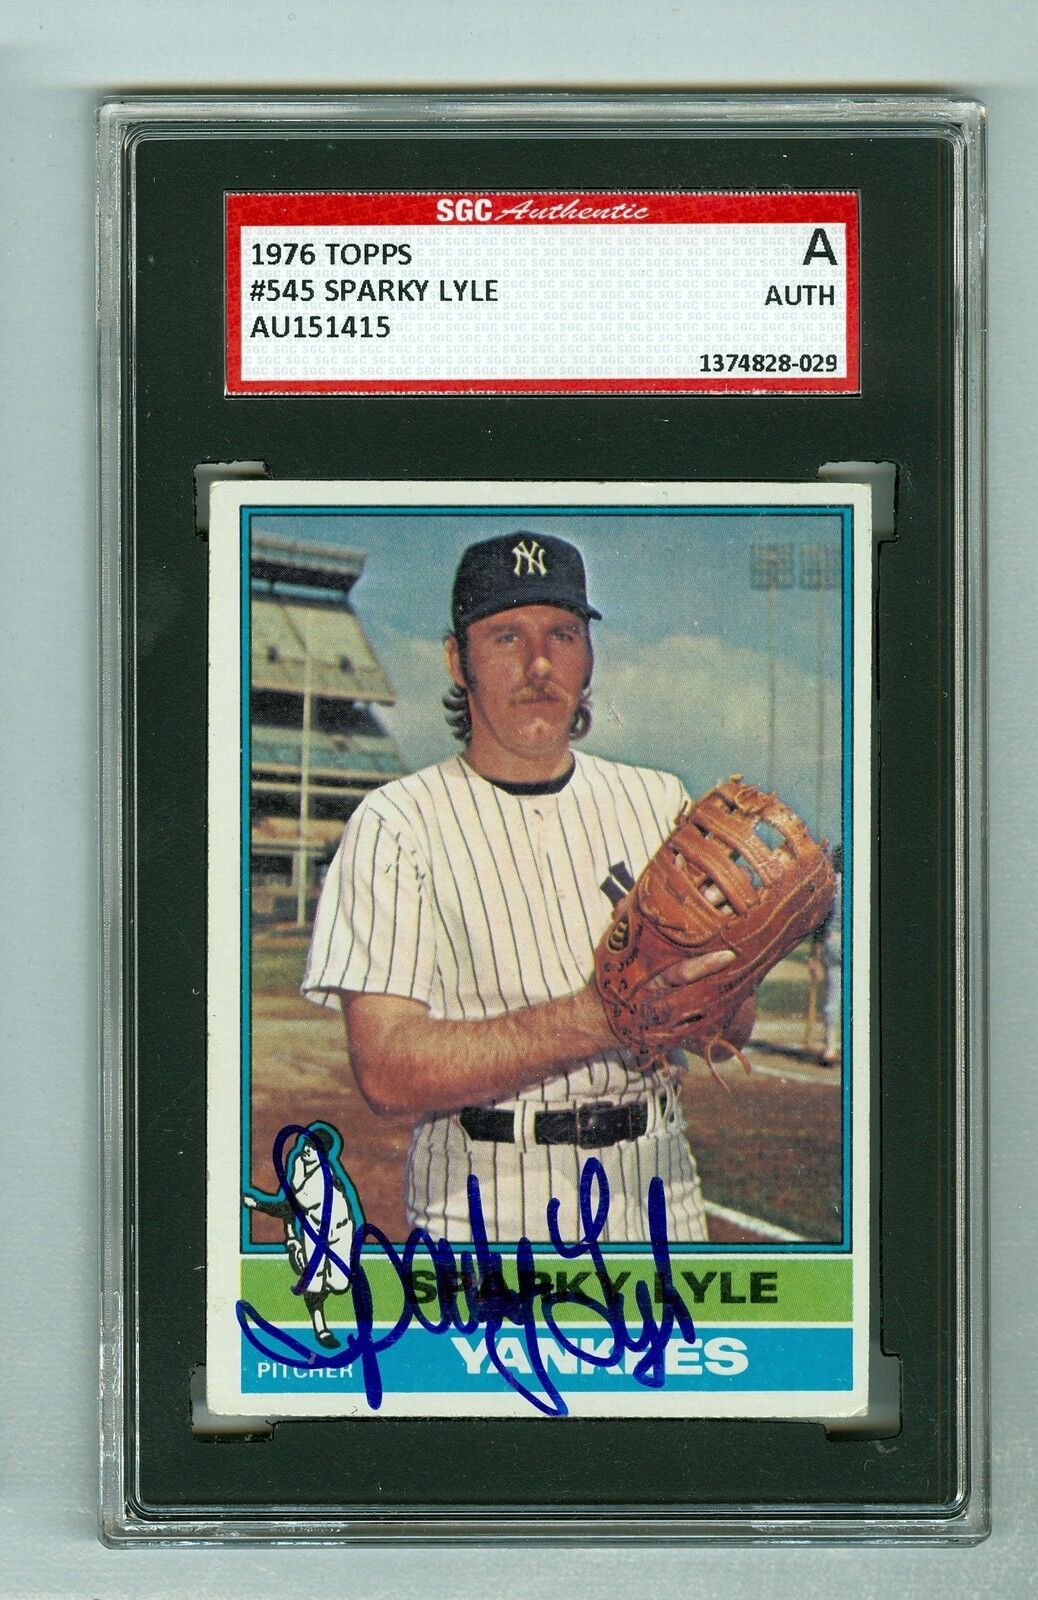 Sparky Lyle Autographed 1976 Topps Card #545 Yankees SGC Authentic Encased